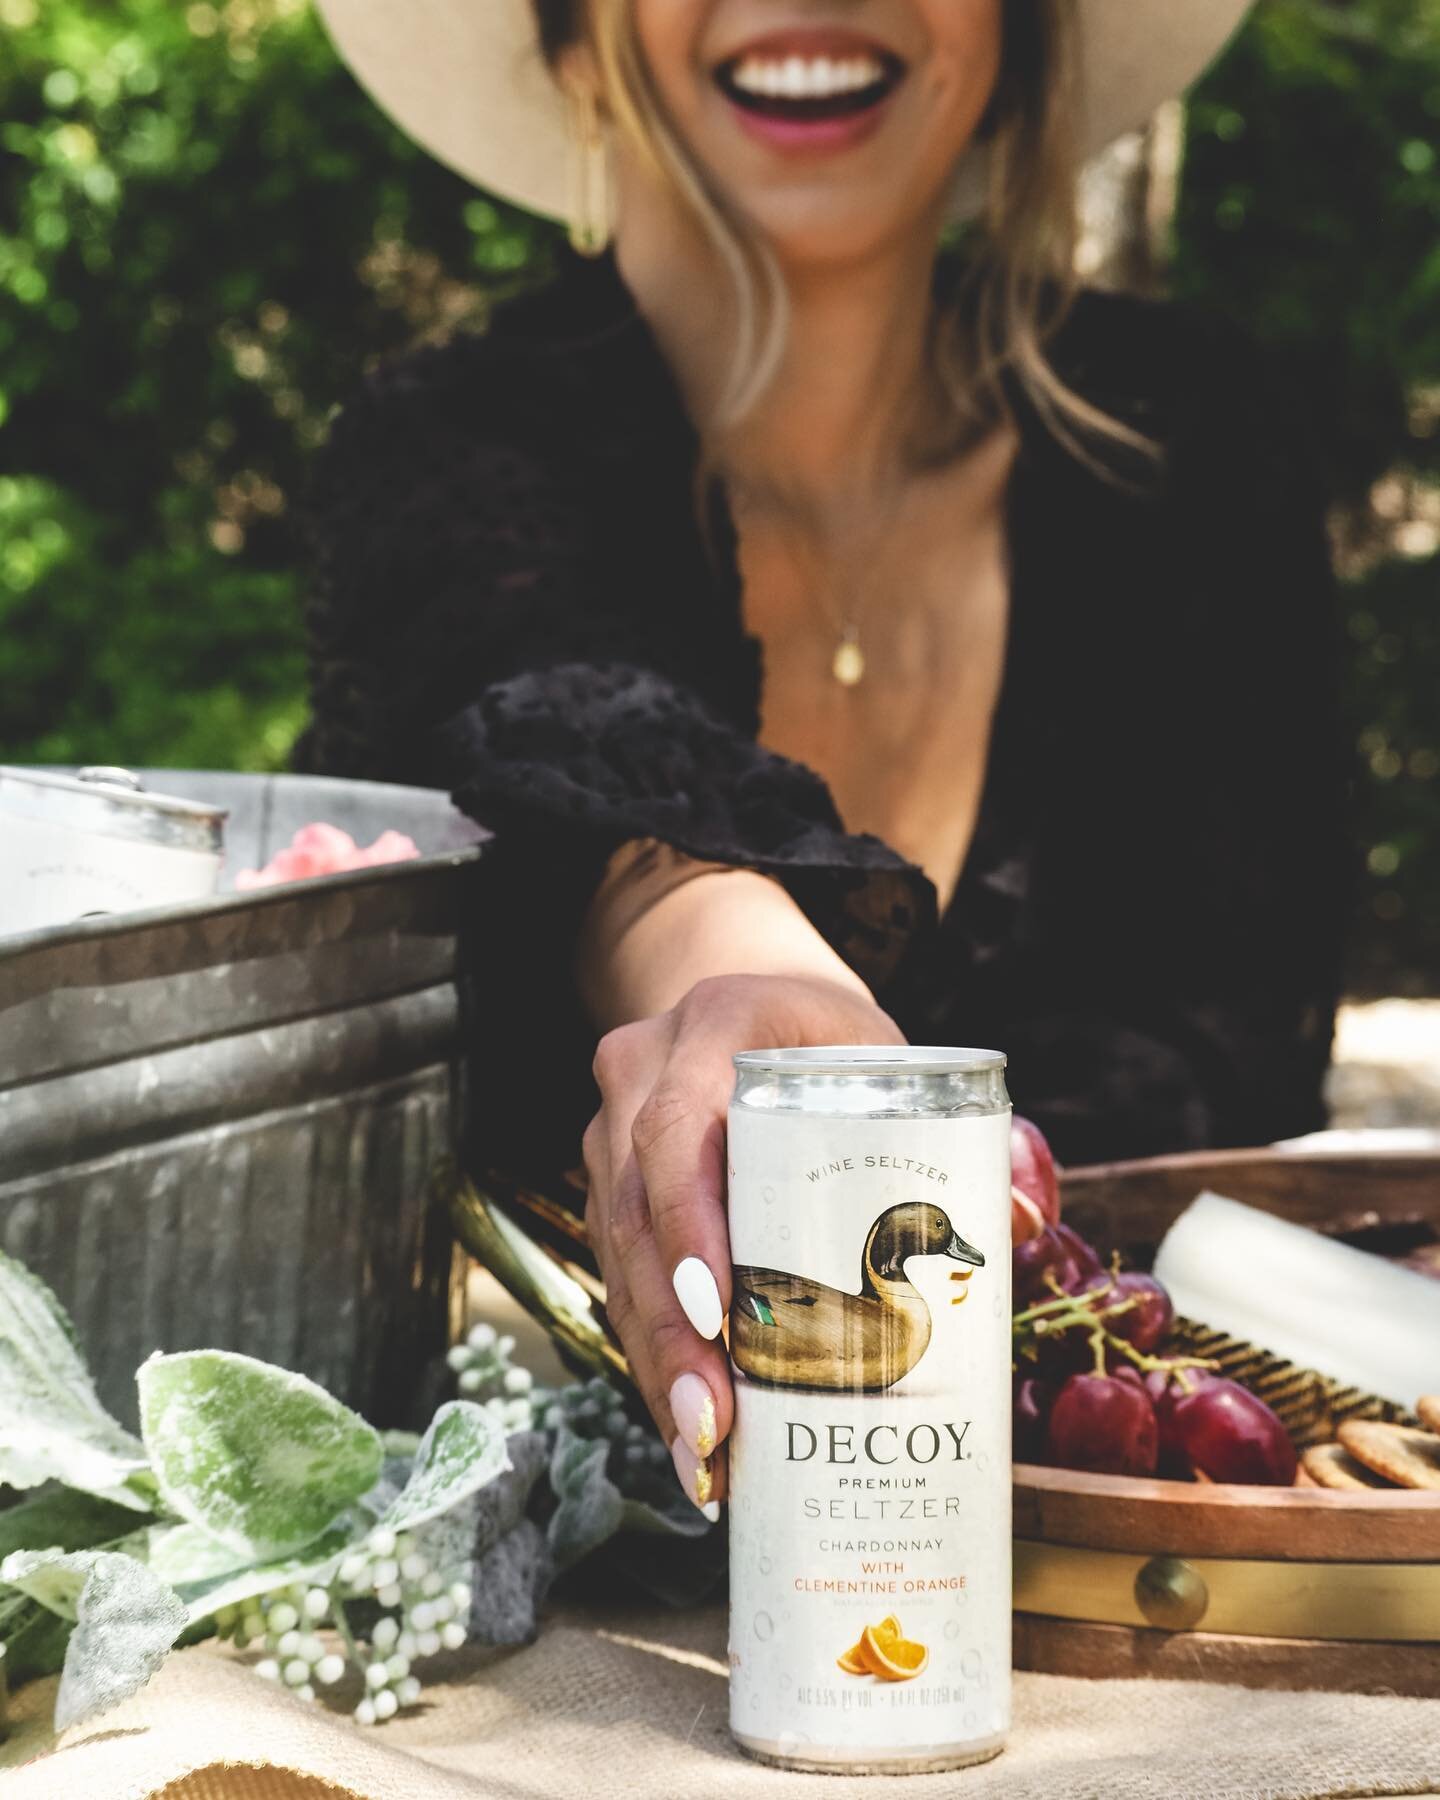 We are sipping premium this season! #ad The Decoy Premium Seltzers are refreshingly flavor-focused, wine-based seltzers. Yes, you read that right, &quot;WINE-BASED.&quot; 🤯 They spent over a year making these to get the flavor and carbonation perfec